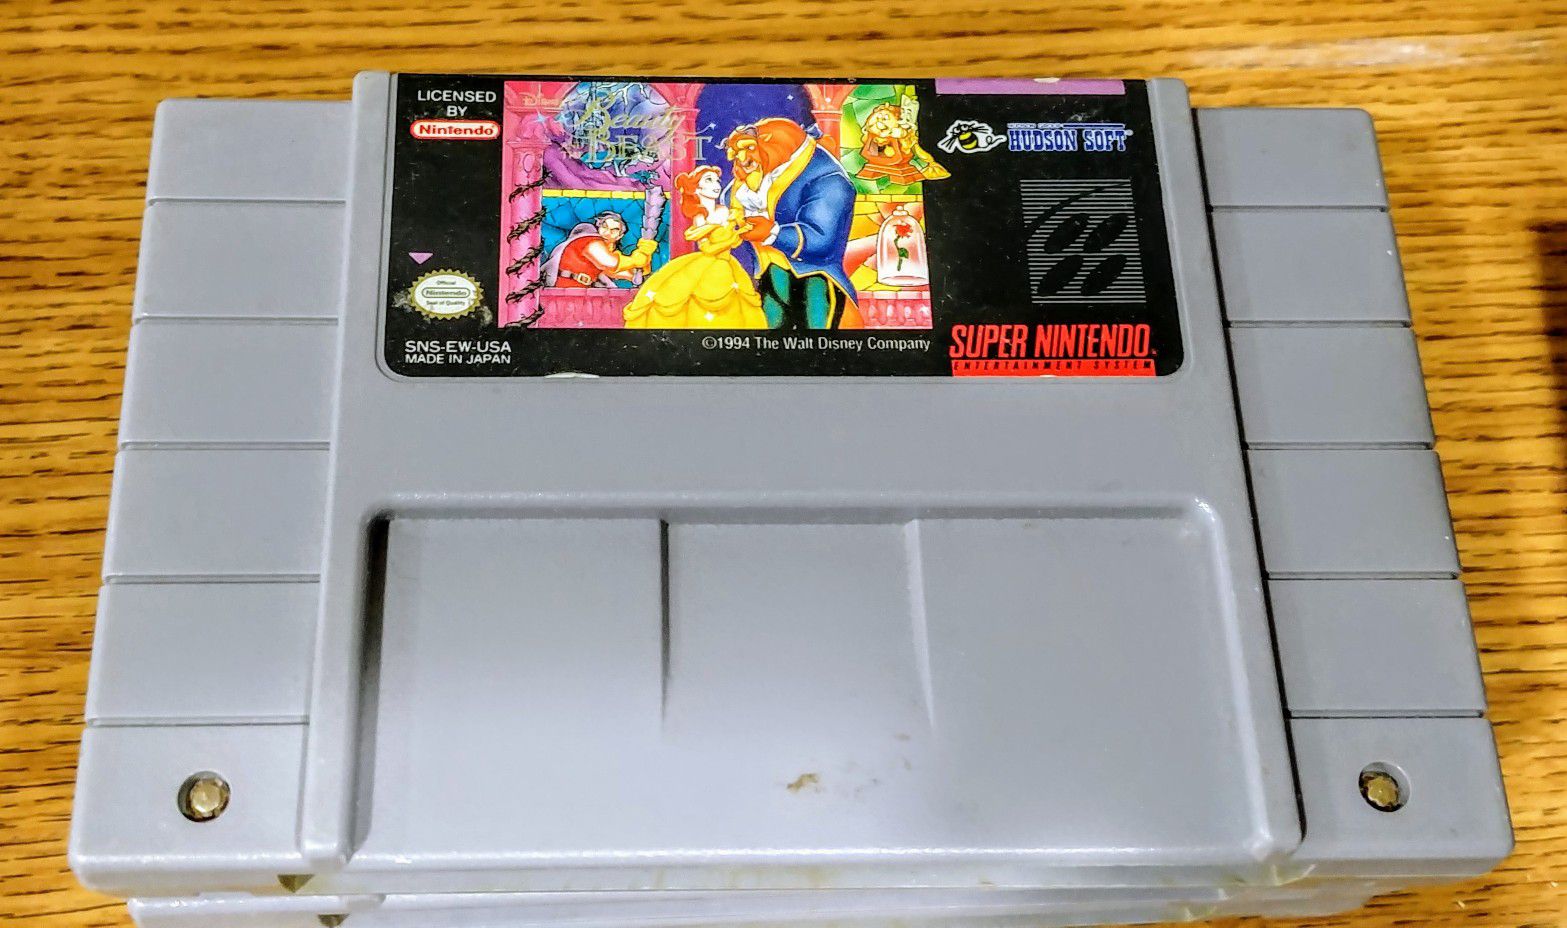 Super Nintendo Beauty and the Beast Game